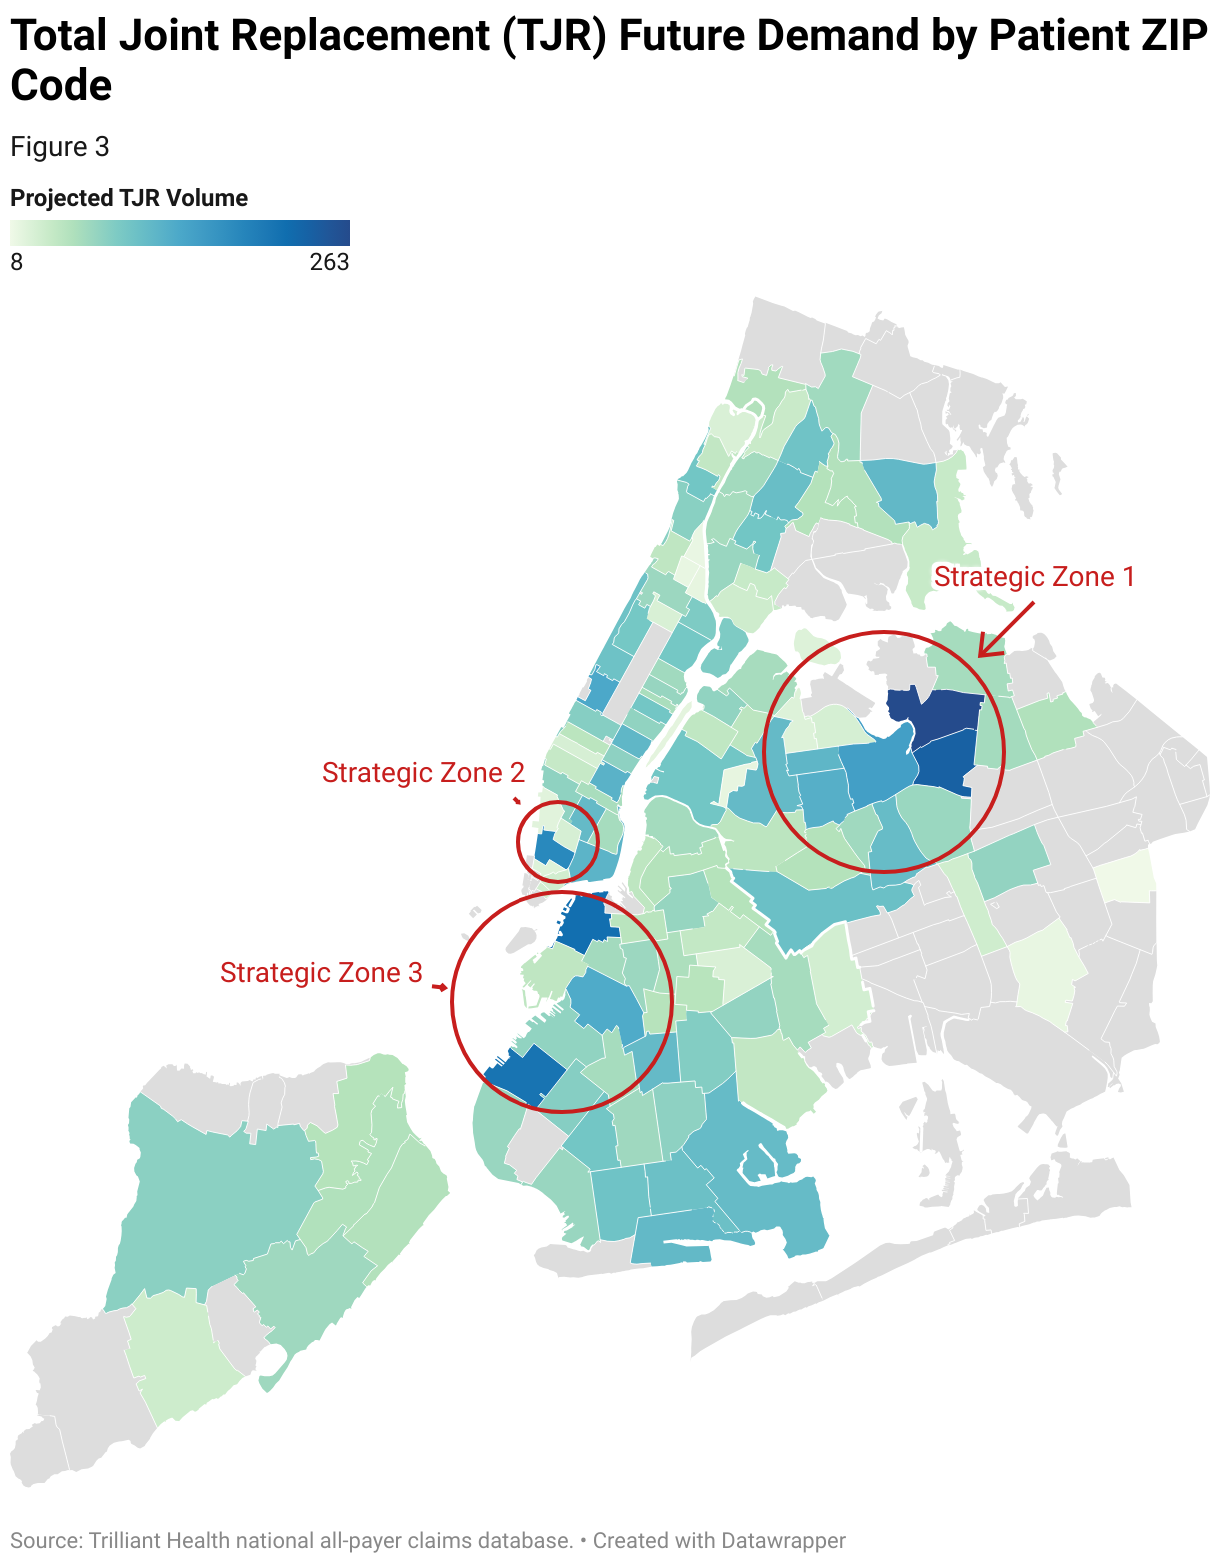 A map of future demand for Total Joint Replacements (TJR) in New York City. Three strategic zones are circled, which represent high areas of future demand.